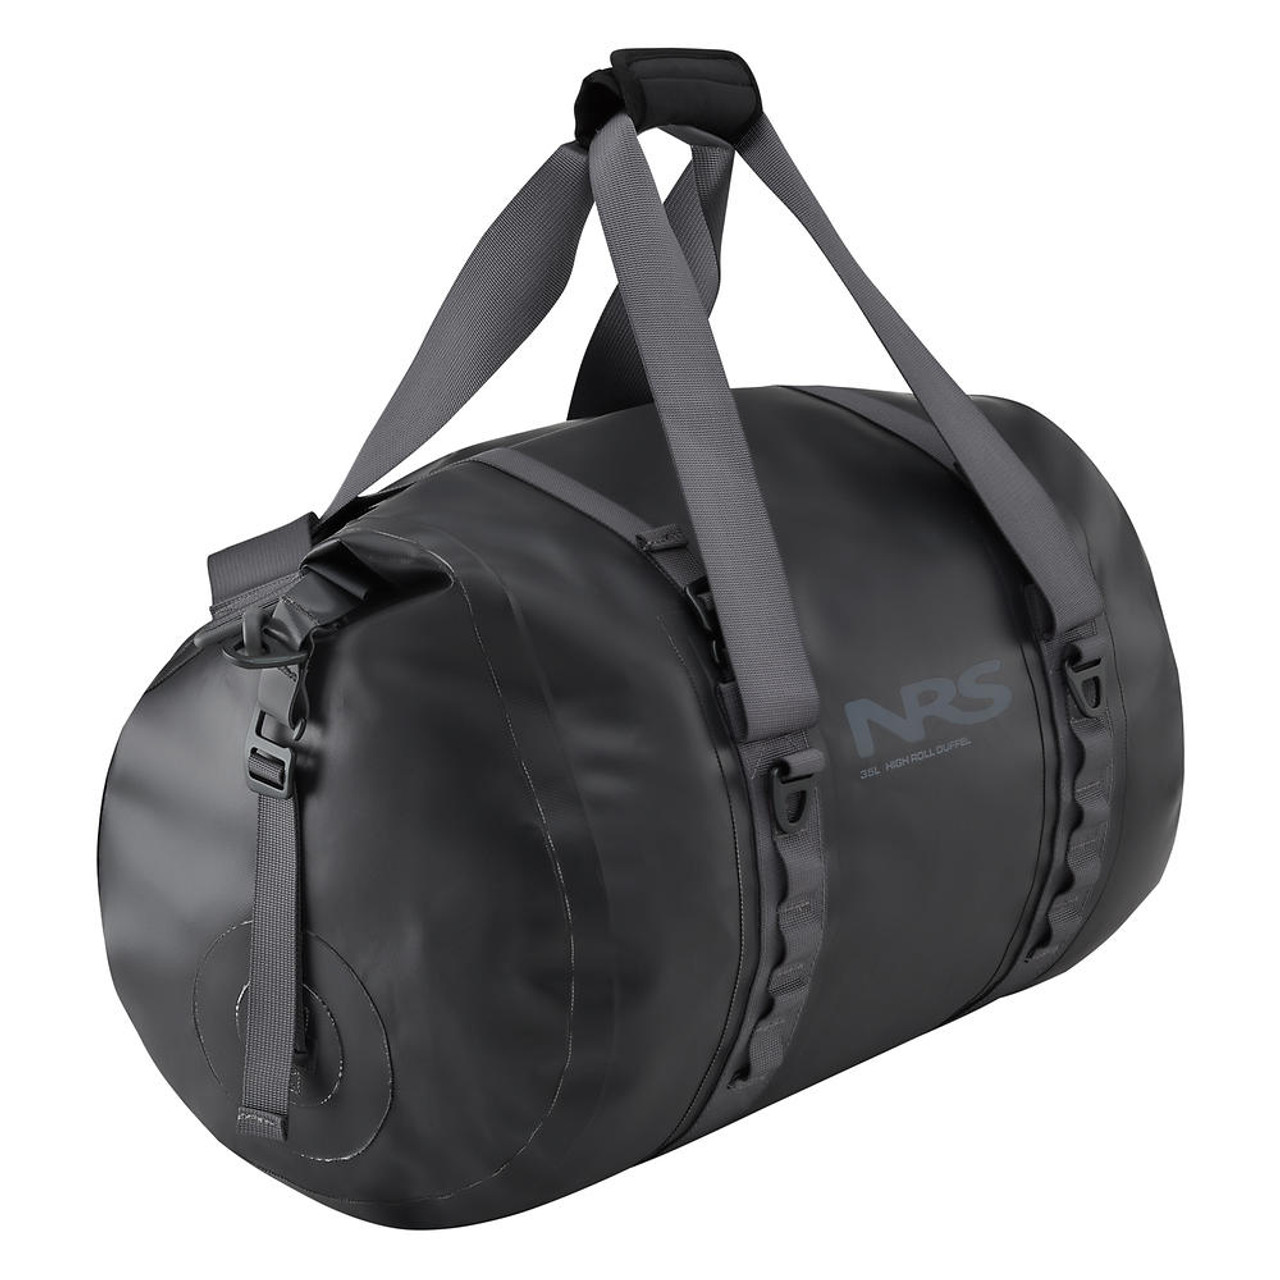 NRS Expedition DriDuffel Dry Bag - Closeout